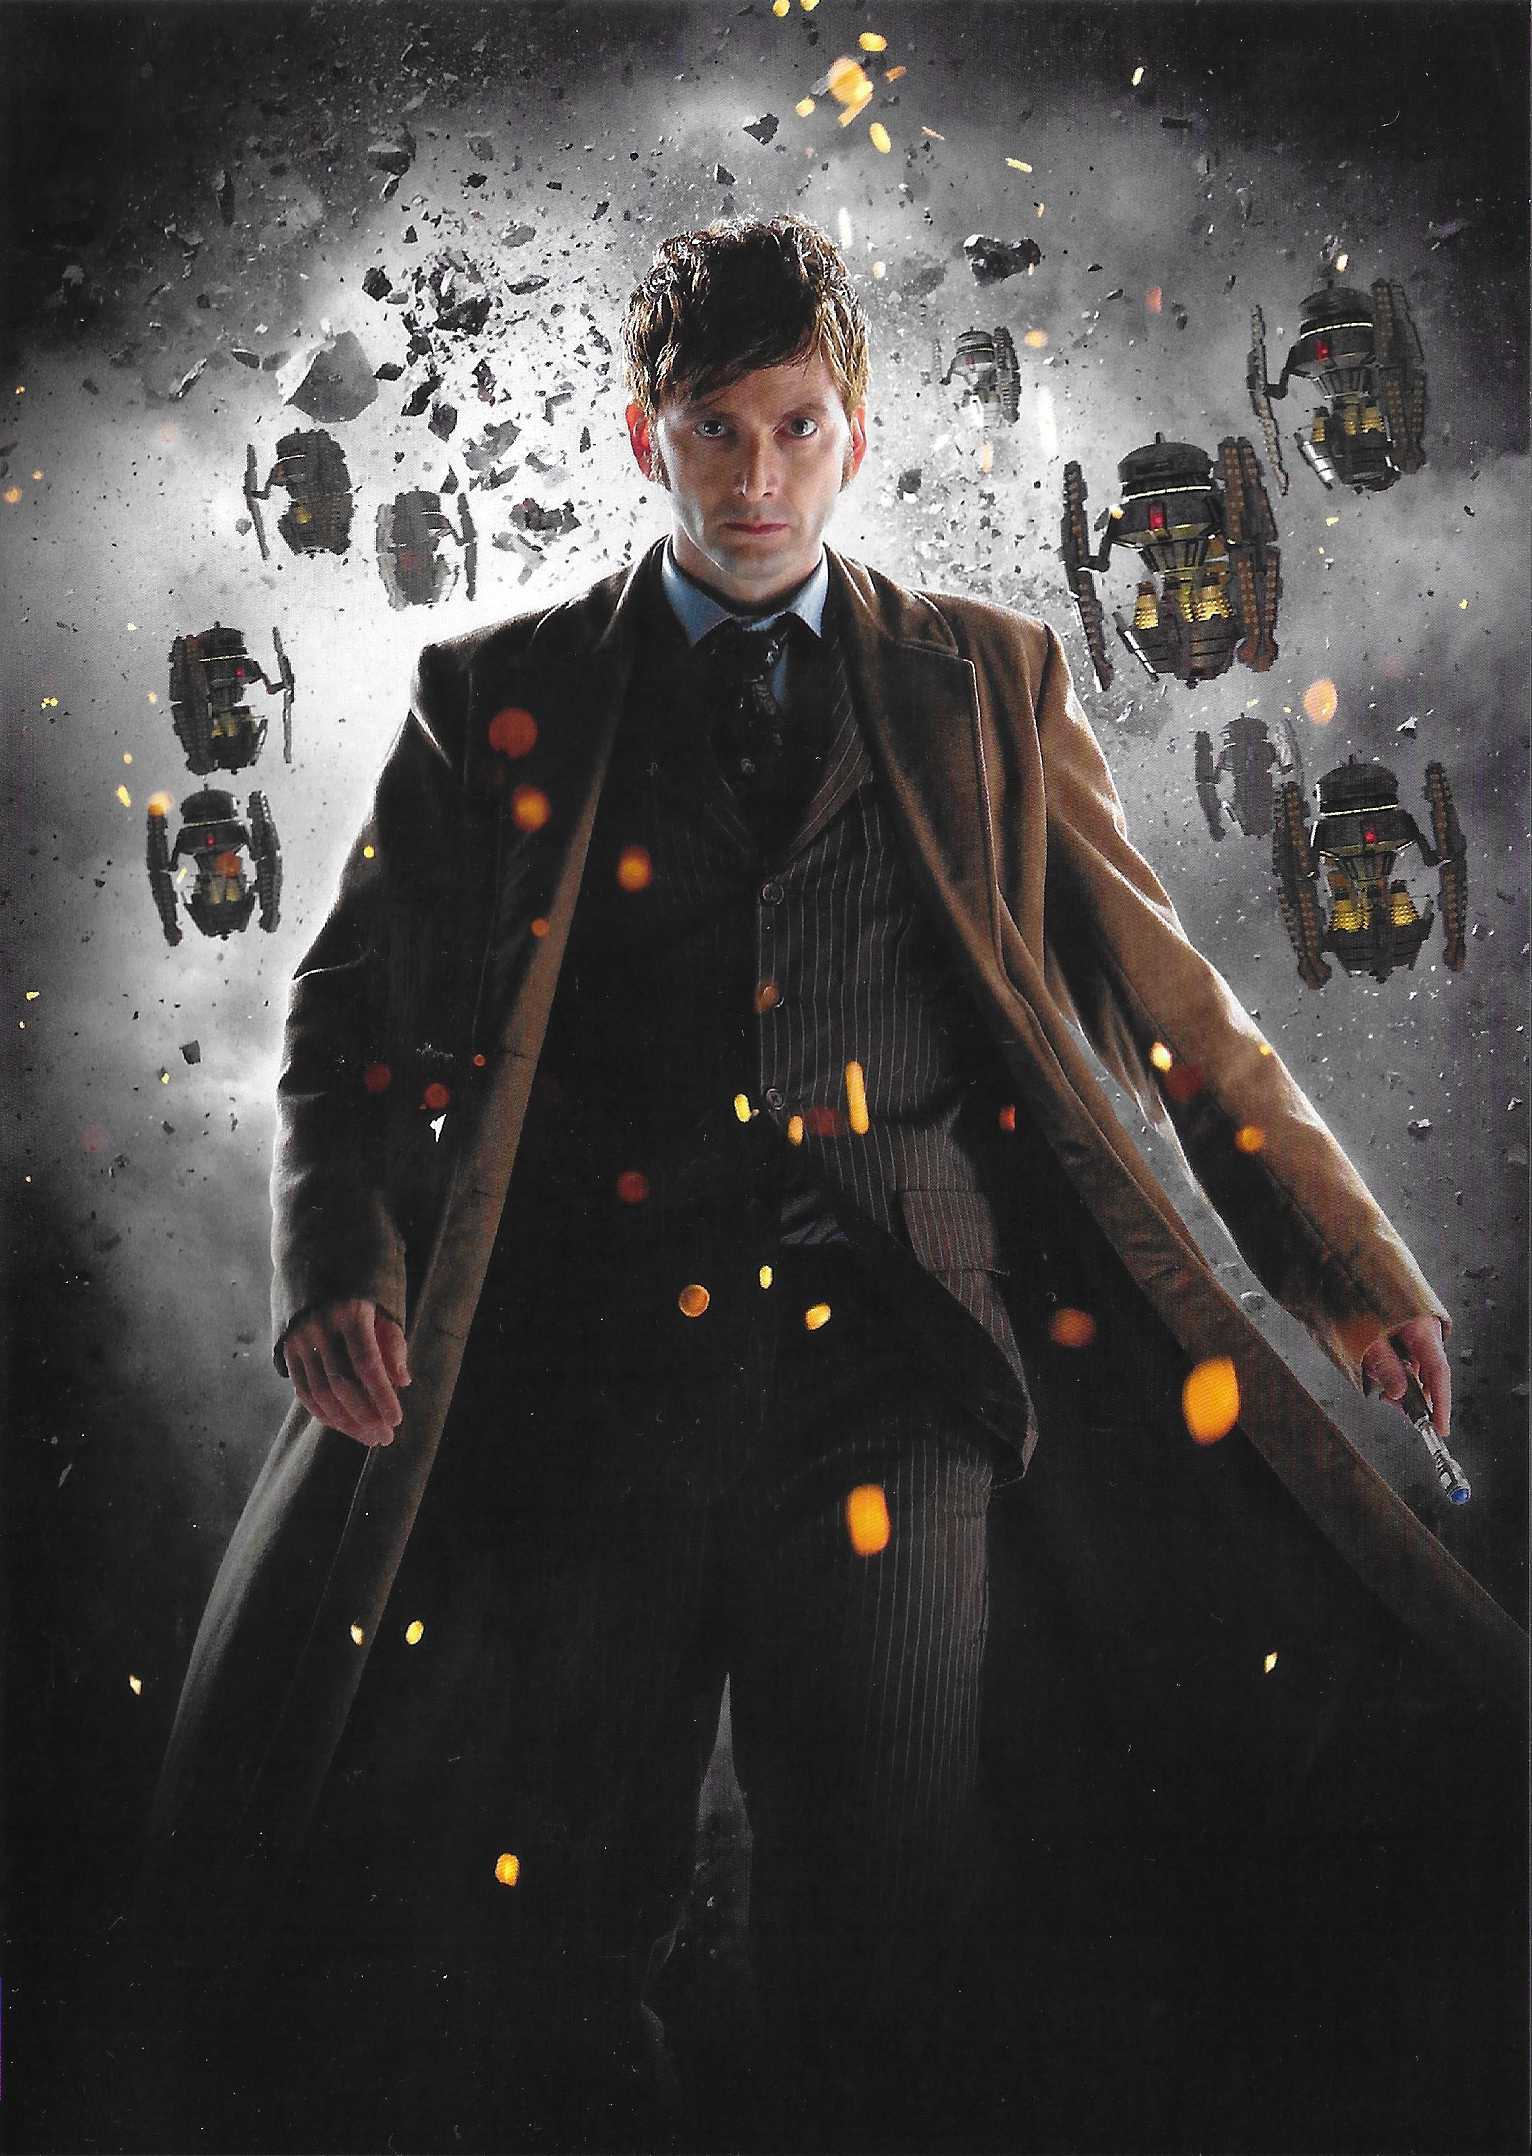 Picture of BBCDVD 3933 02 Doctor Who - The day of the Doctor by artist Steven Moffat from the BBC dvds - Records and Tapes library